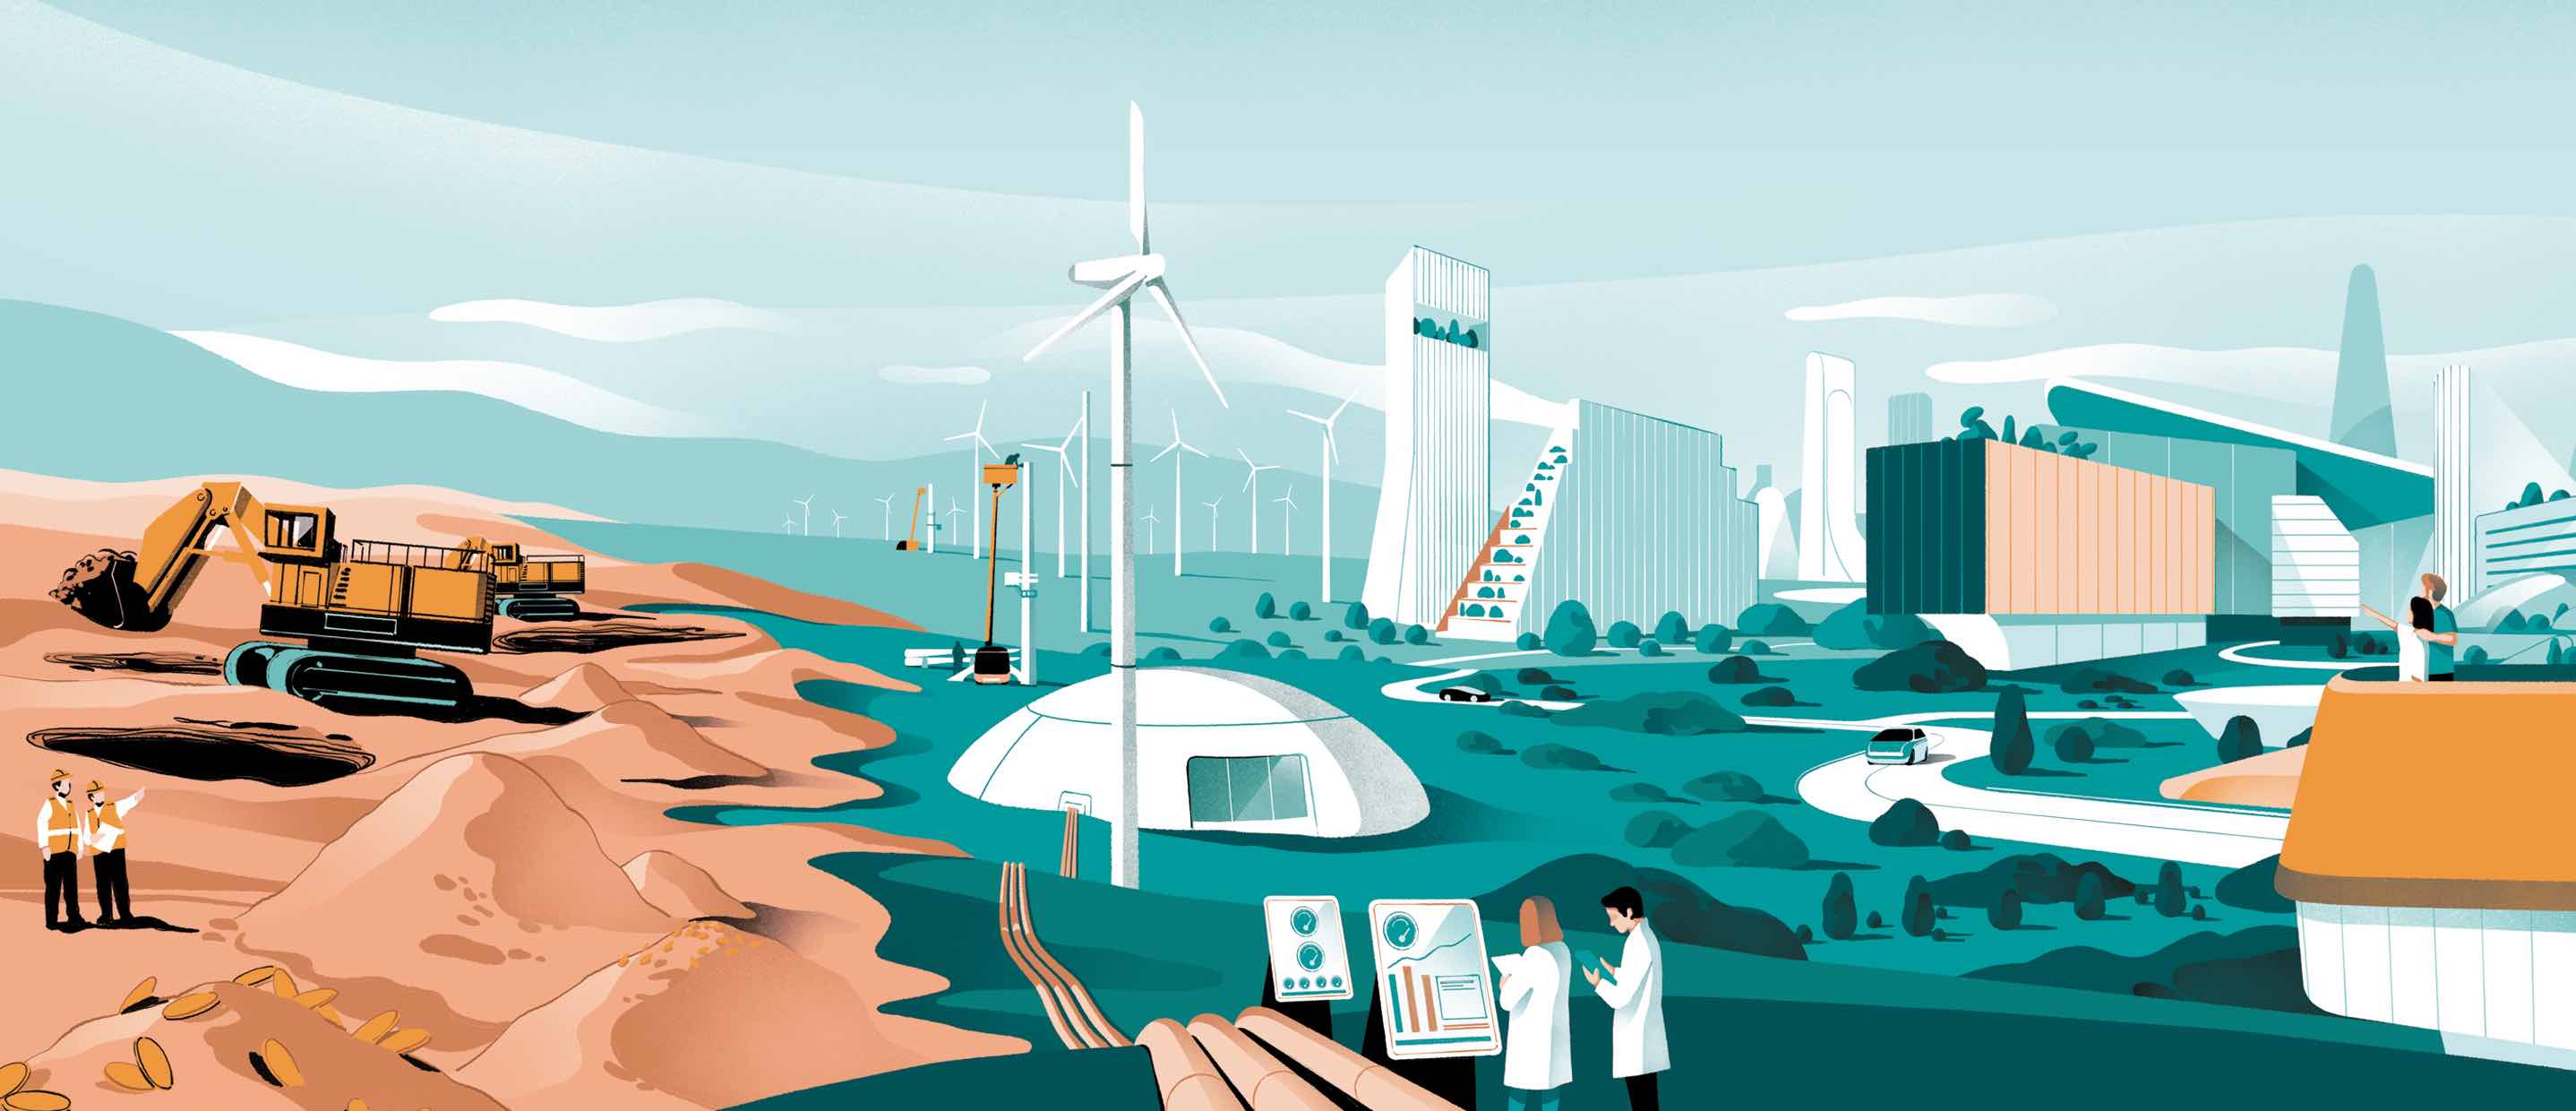 Infrastructure: Supporting a sustainable future | Deutsche wealth management services